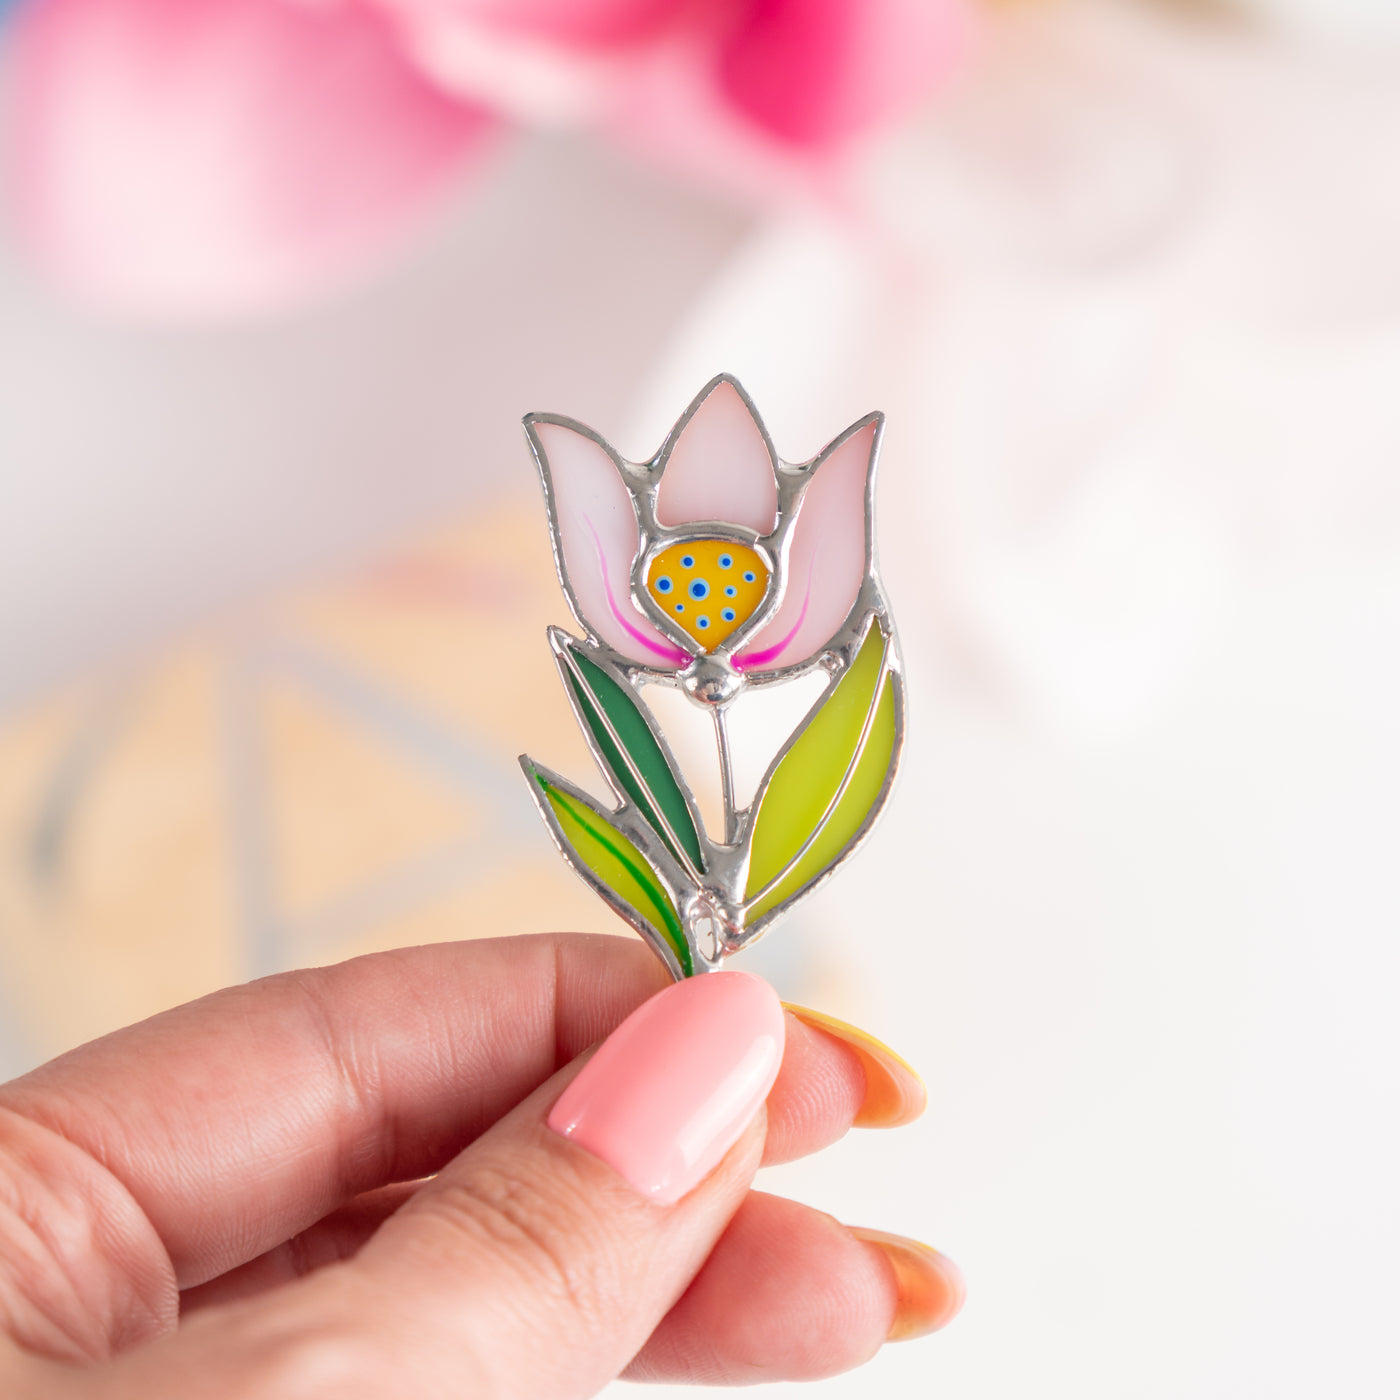 Stained glass pink anemone flower brooch